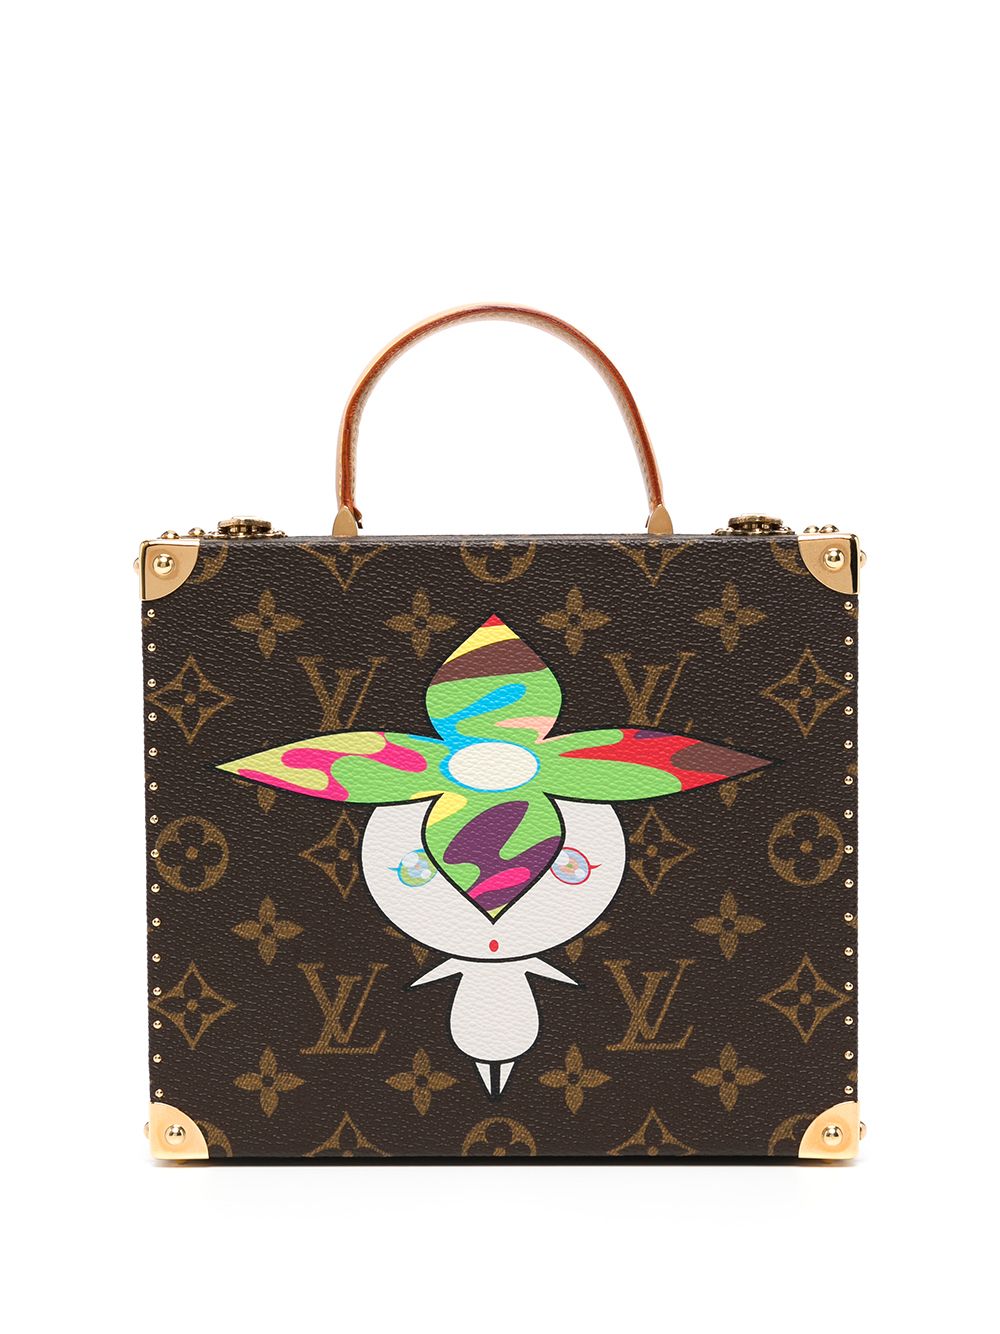 Louis Vuitton Pre-Owned x Takashi Murakami 2003 pre-owned jewellery case bag - Brown